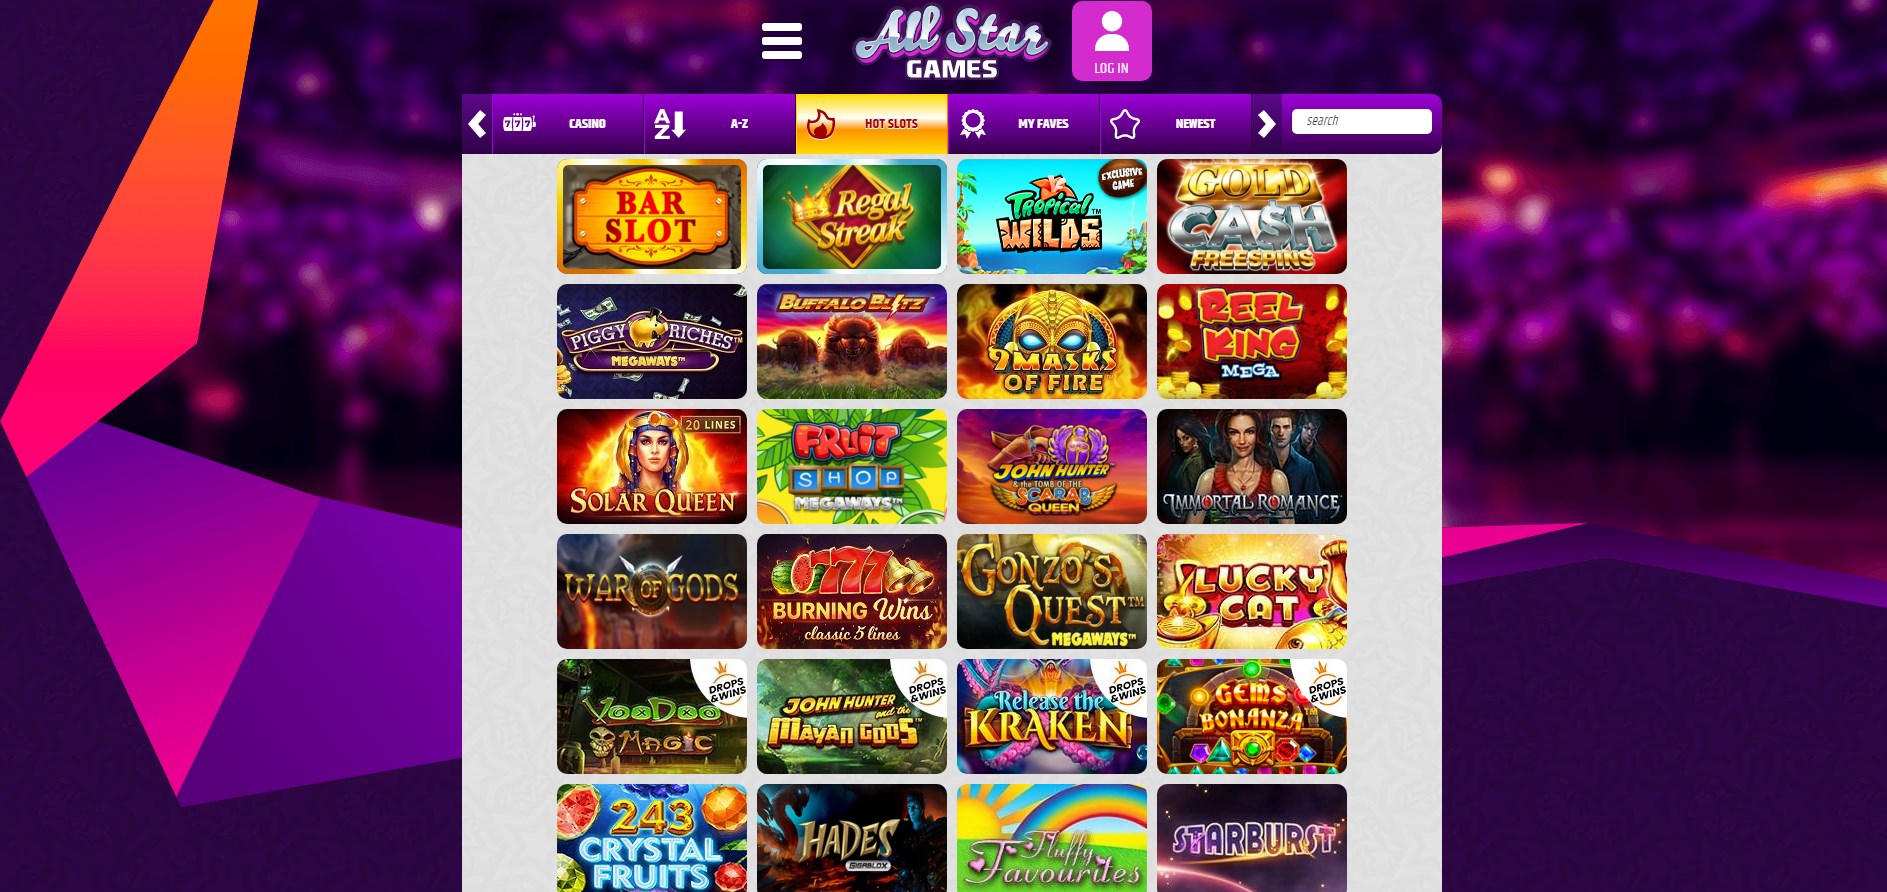 All Star Games Casino Games